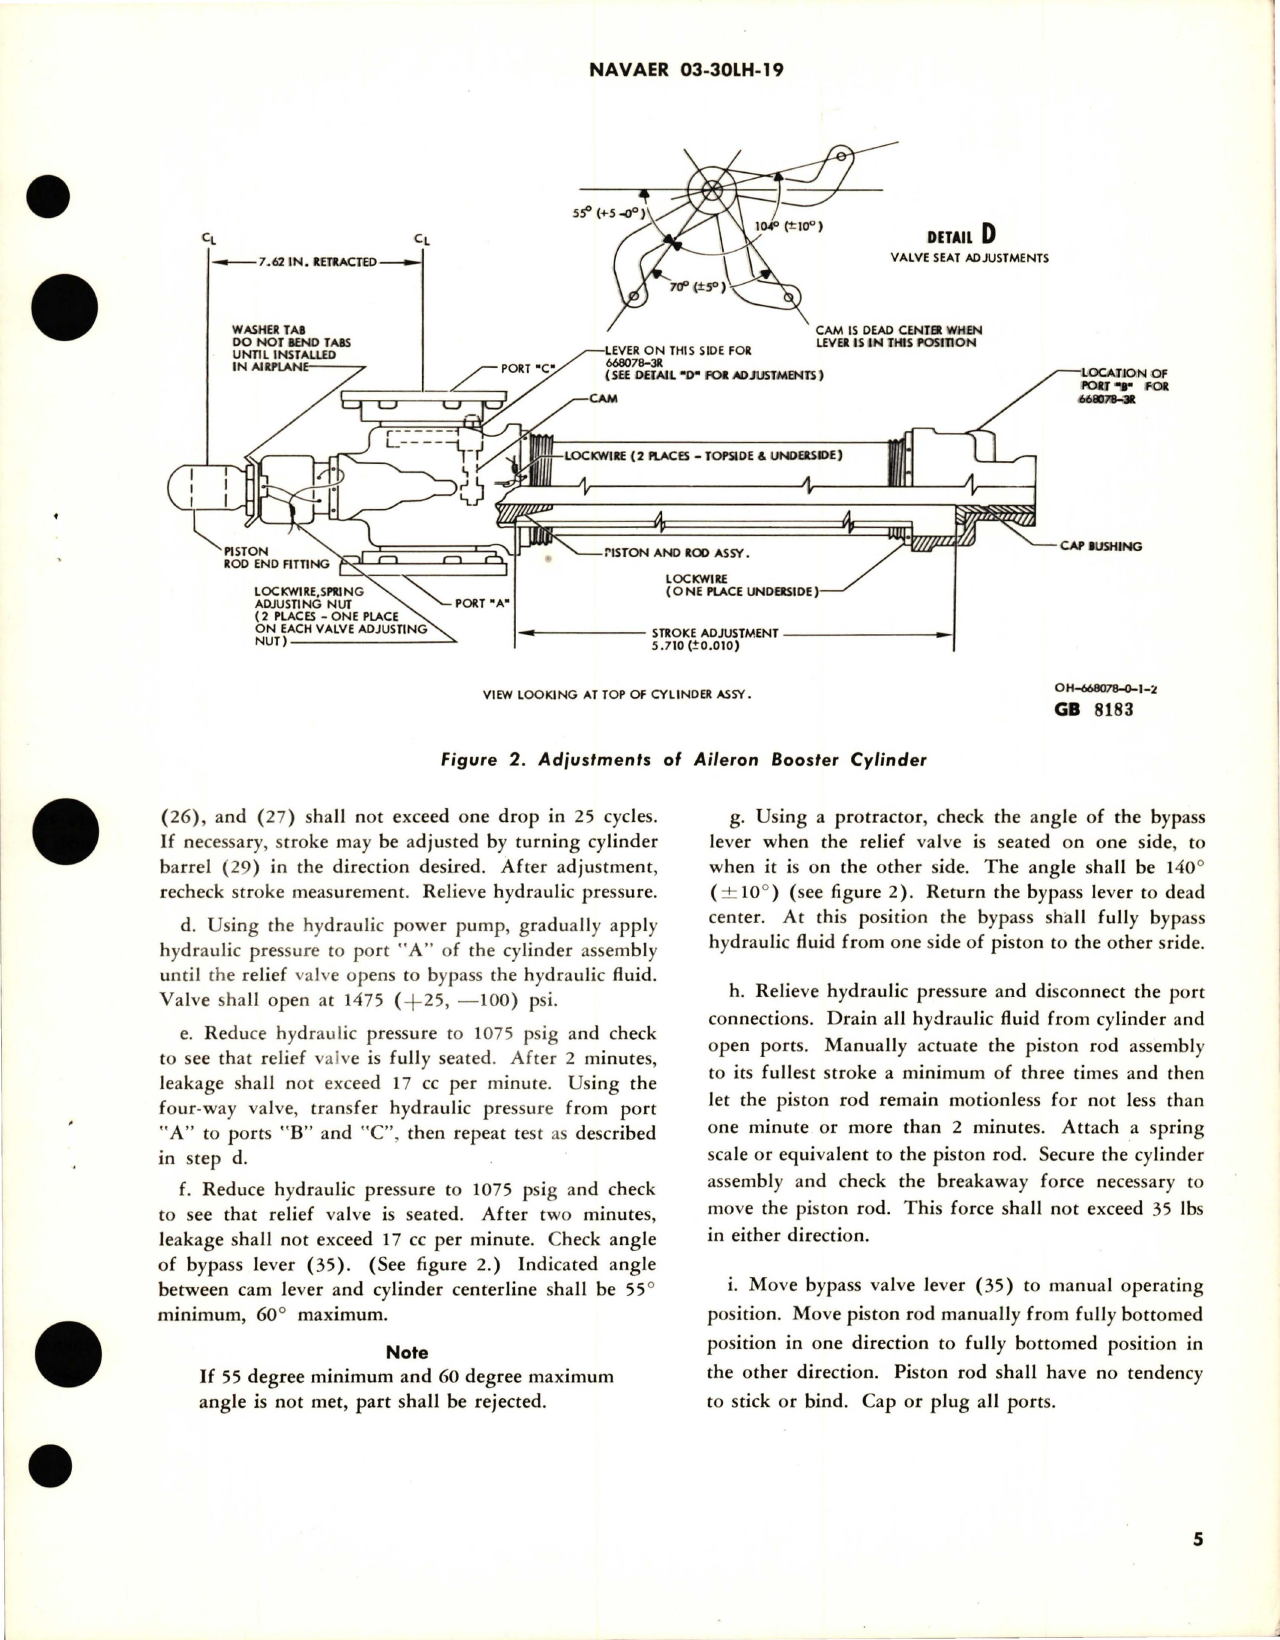 Sample page 5 from AirCorps Library document: Overhaul Instructions with Parts Breakdown for Aileron Booster Actuating Cylinder - 668078-3